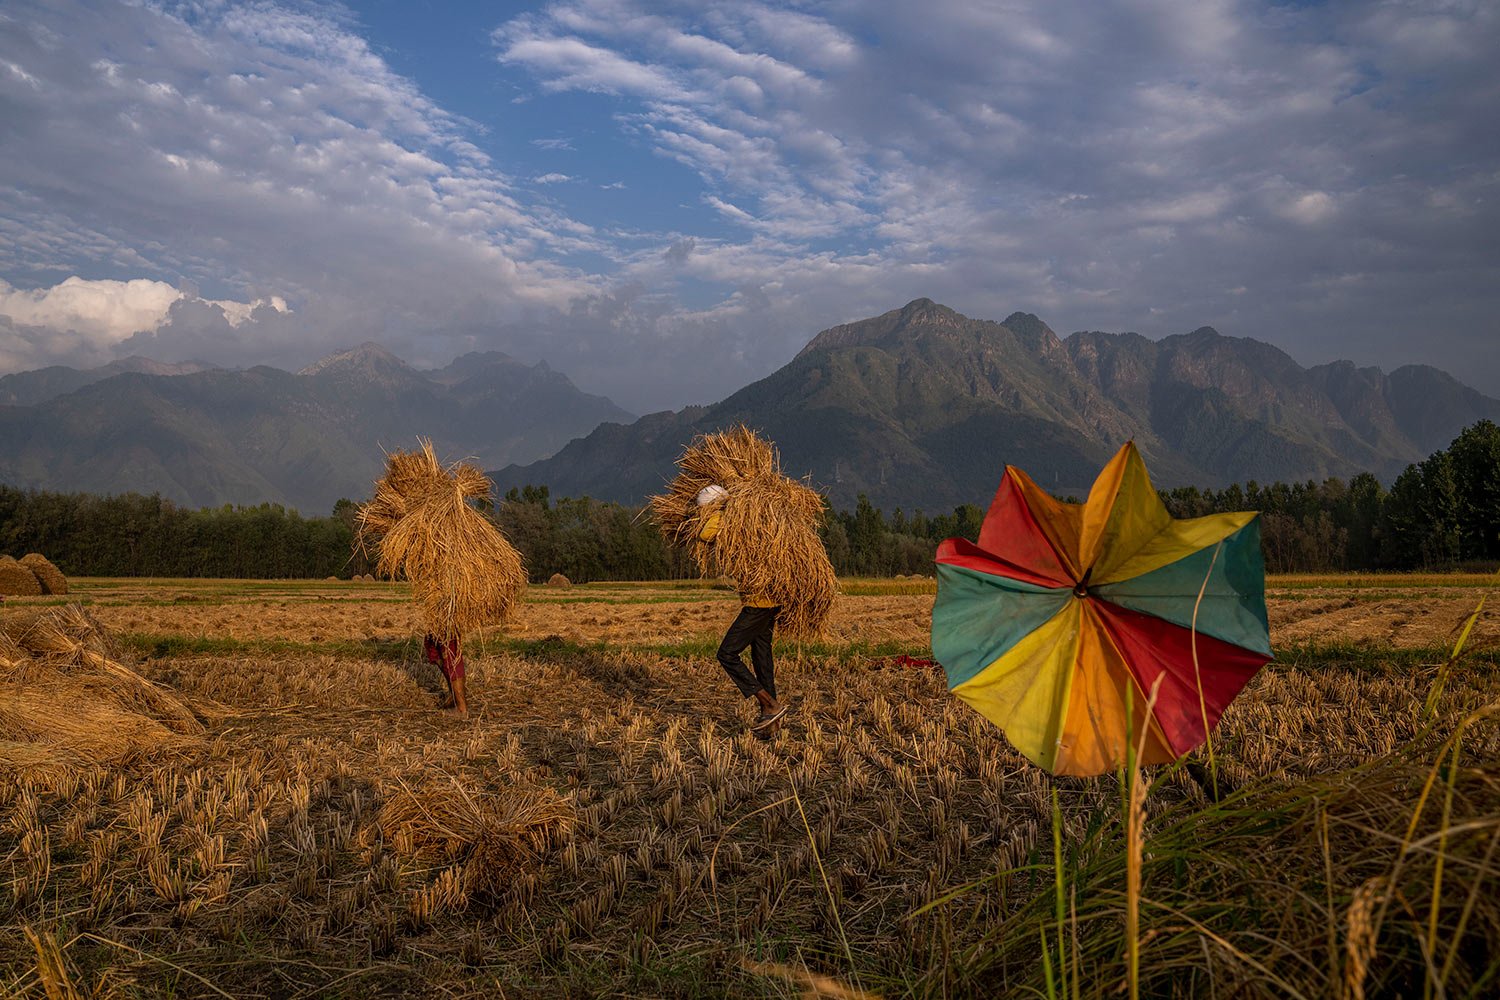  People carry harvested paddy in a rice field on the outskirts of Srinagar, Indian controlled Kashmir, Friday, Sept. 16, 2022. (AP Photo/Dar Yasin) 